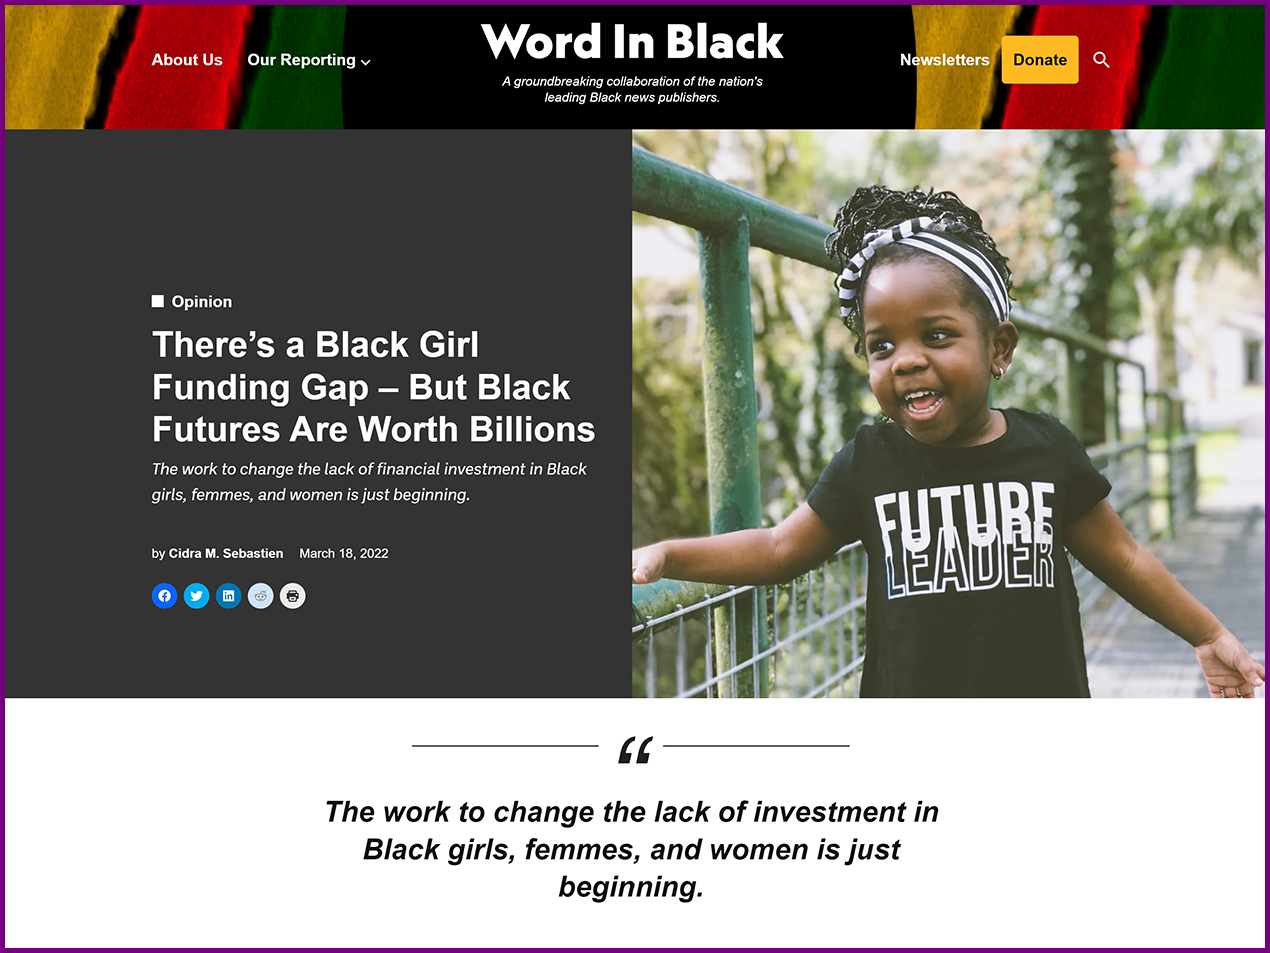 Word in Black op-ed: There’s a Black Girl Funding Gap – But Black Futures Are Worth Billions